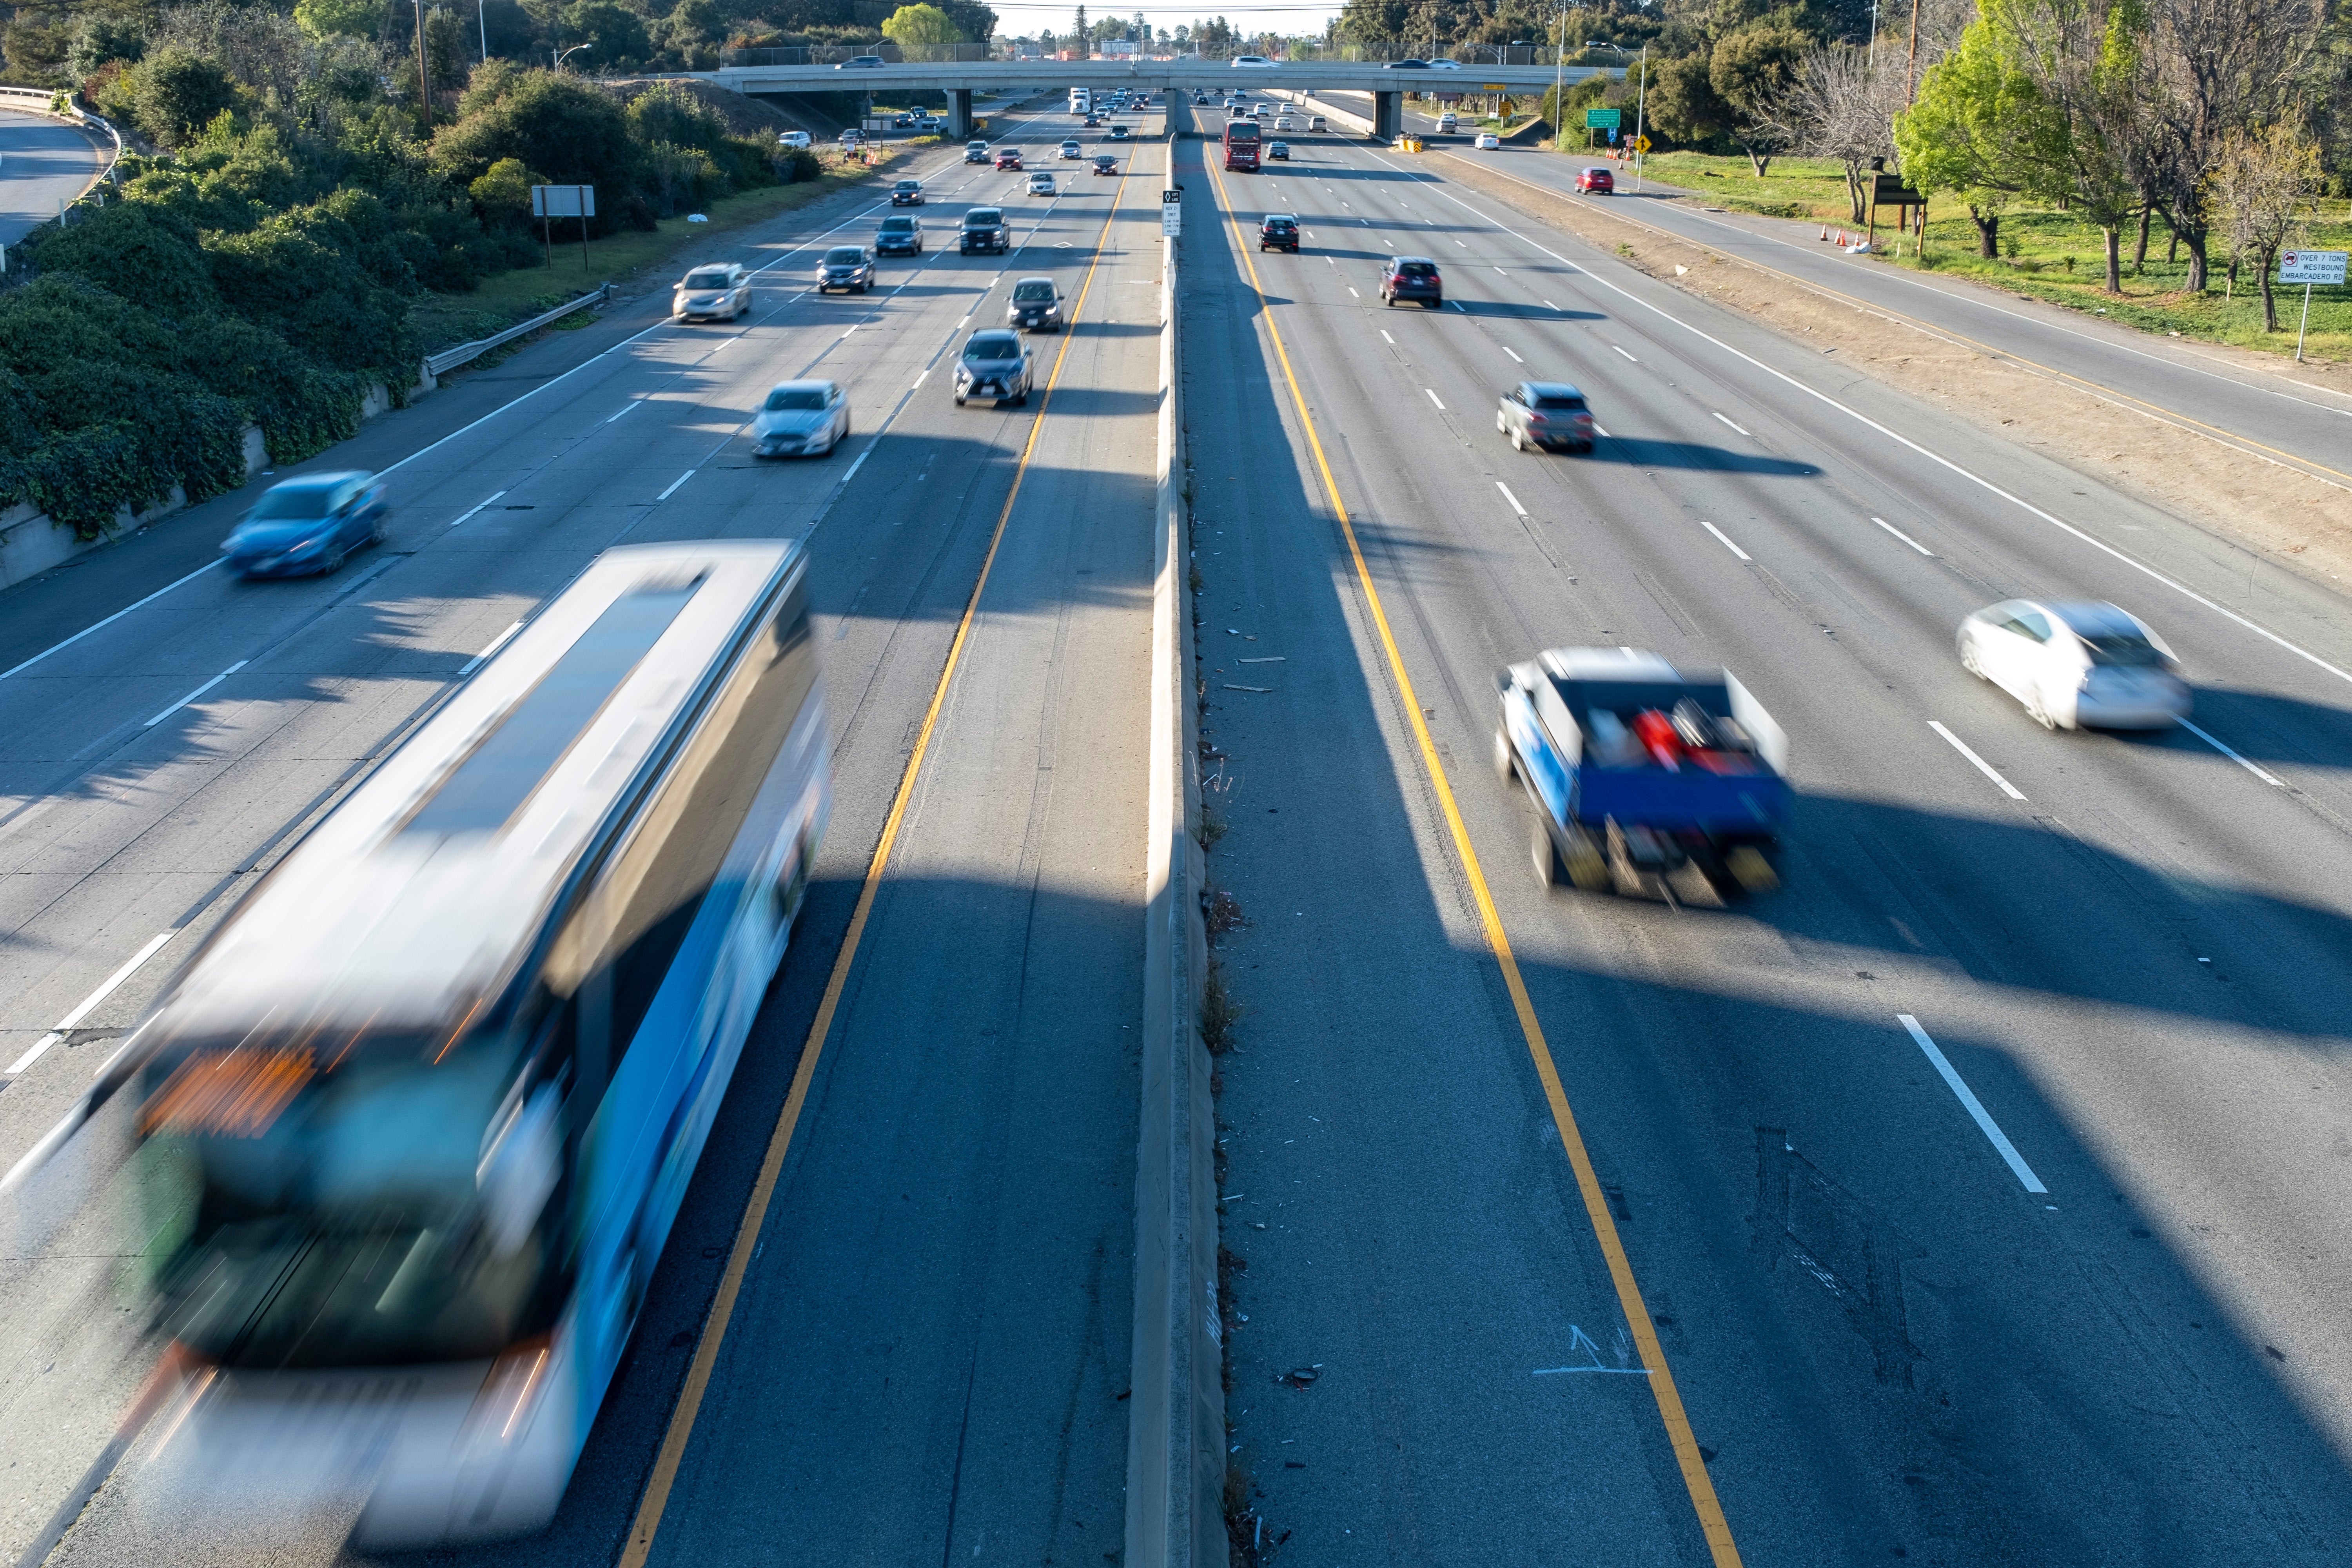 Commuters in Palo Alto, California, driving on a highway on a sunny day.